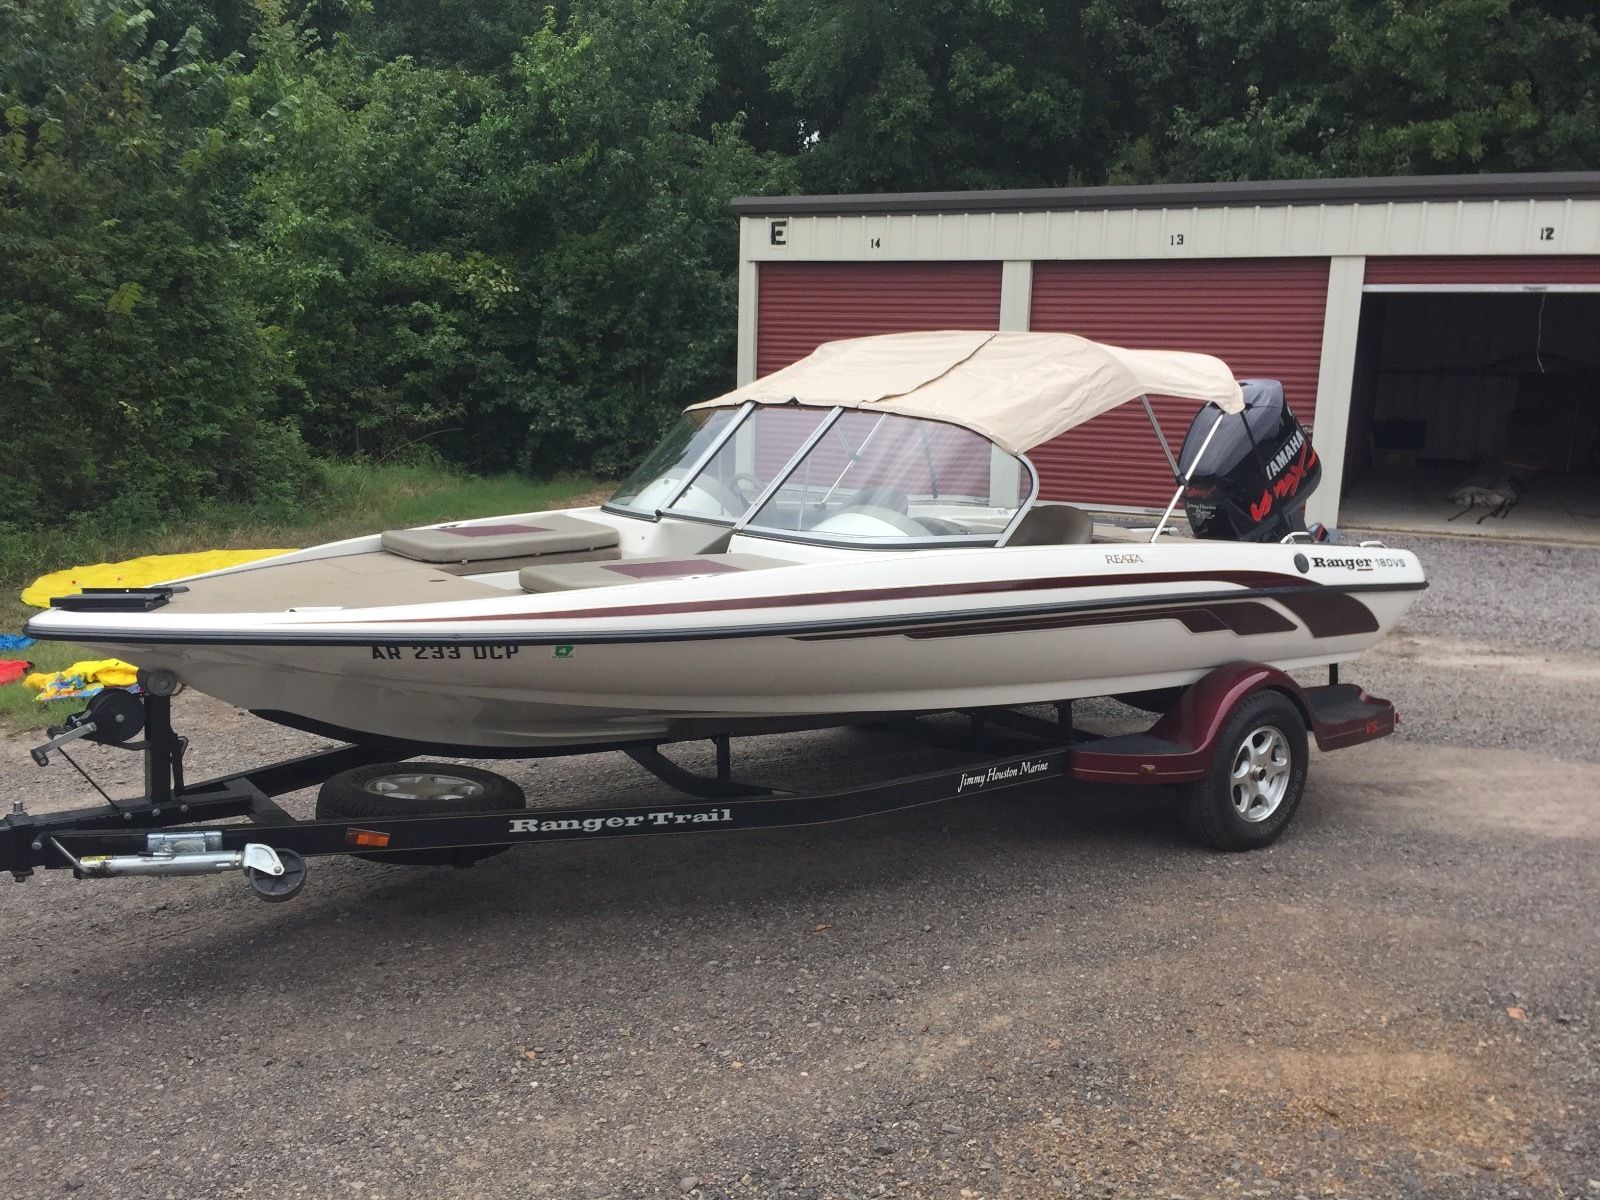 Ranger Reata 180vs 2004 for sale for $1 - Boats-from-USA.com